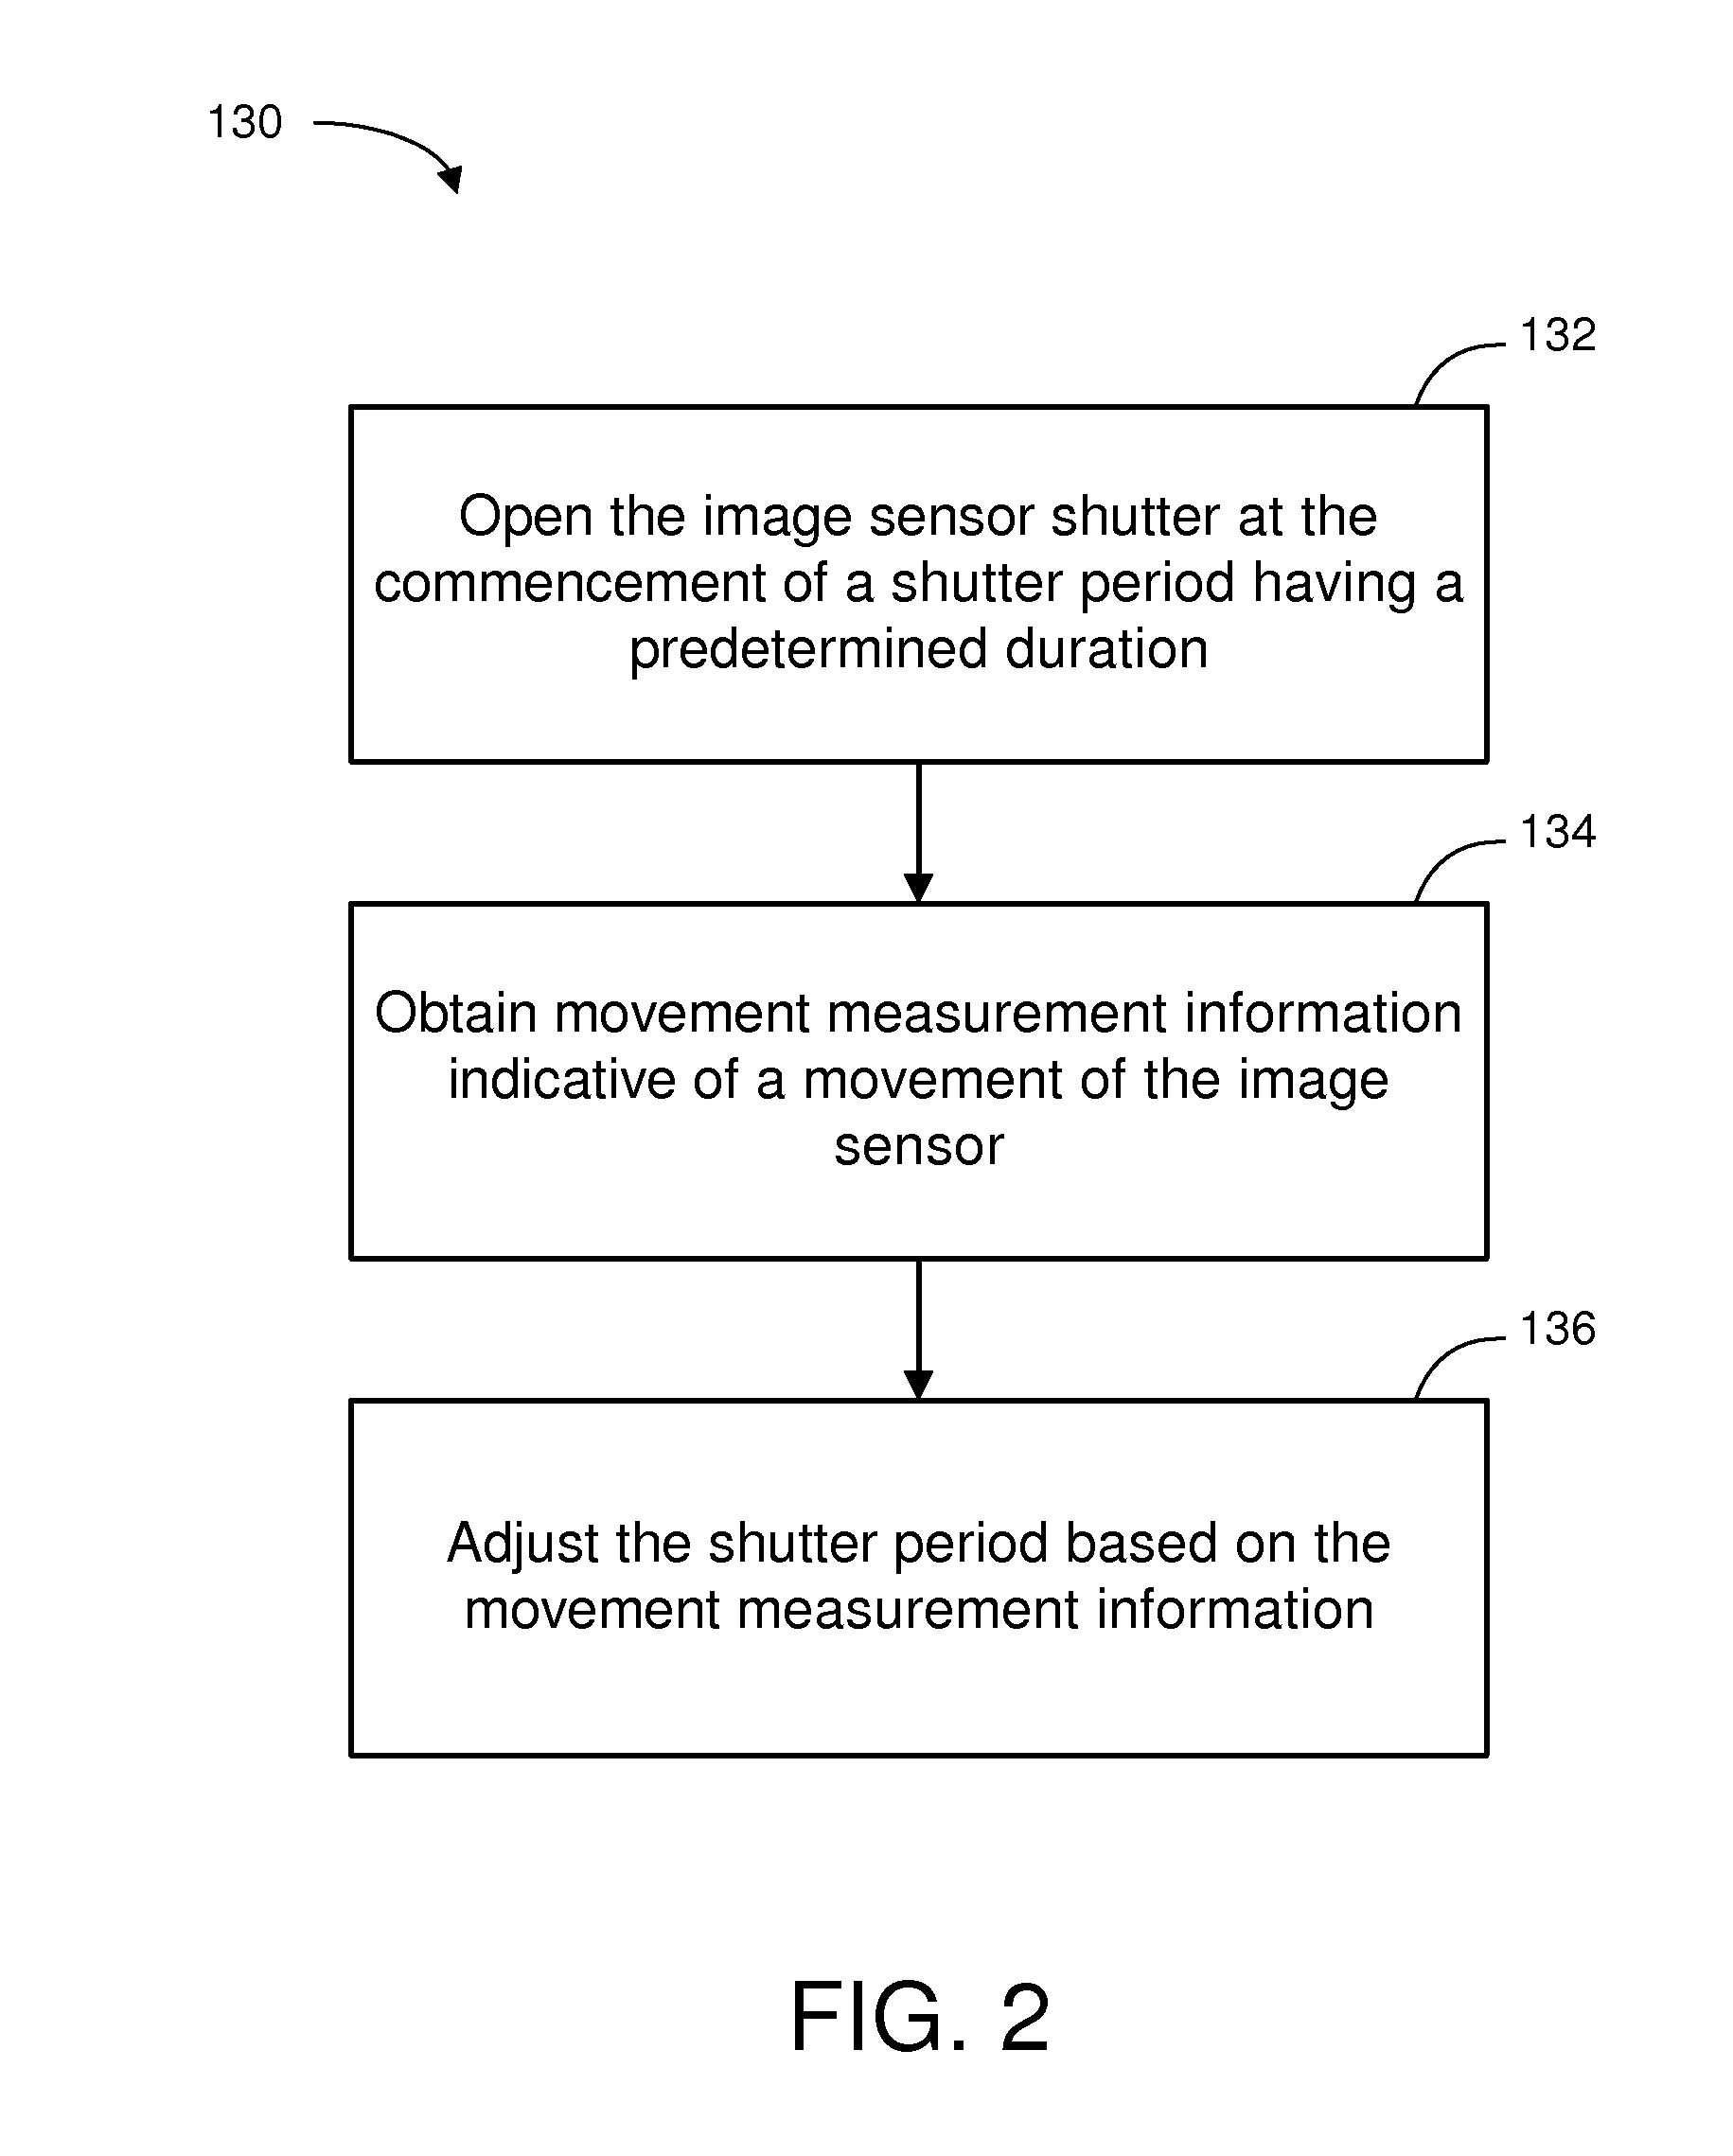 Image stabilization with adaptive shutter control